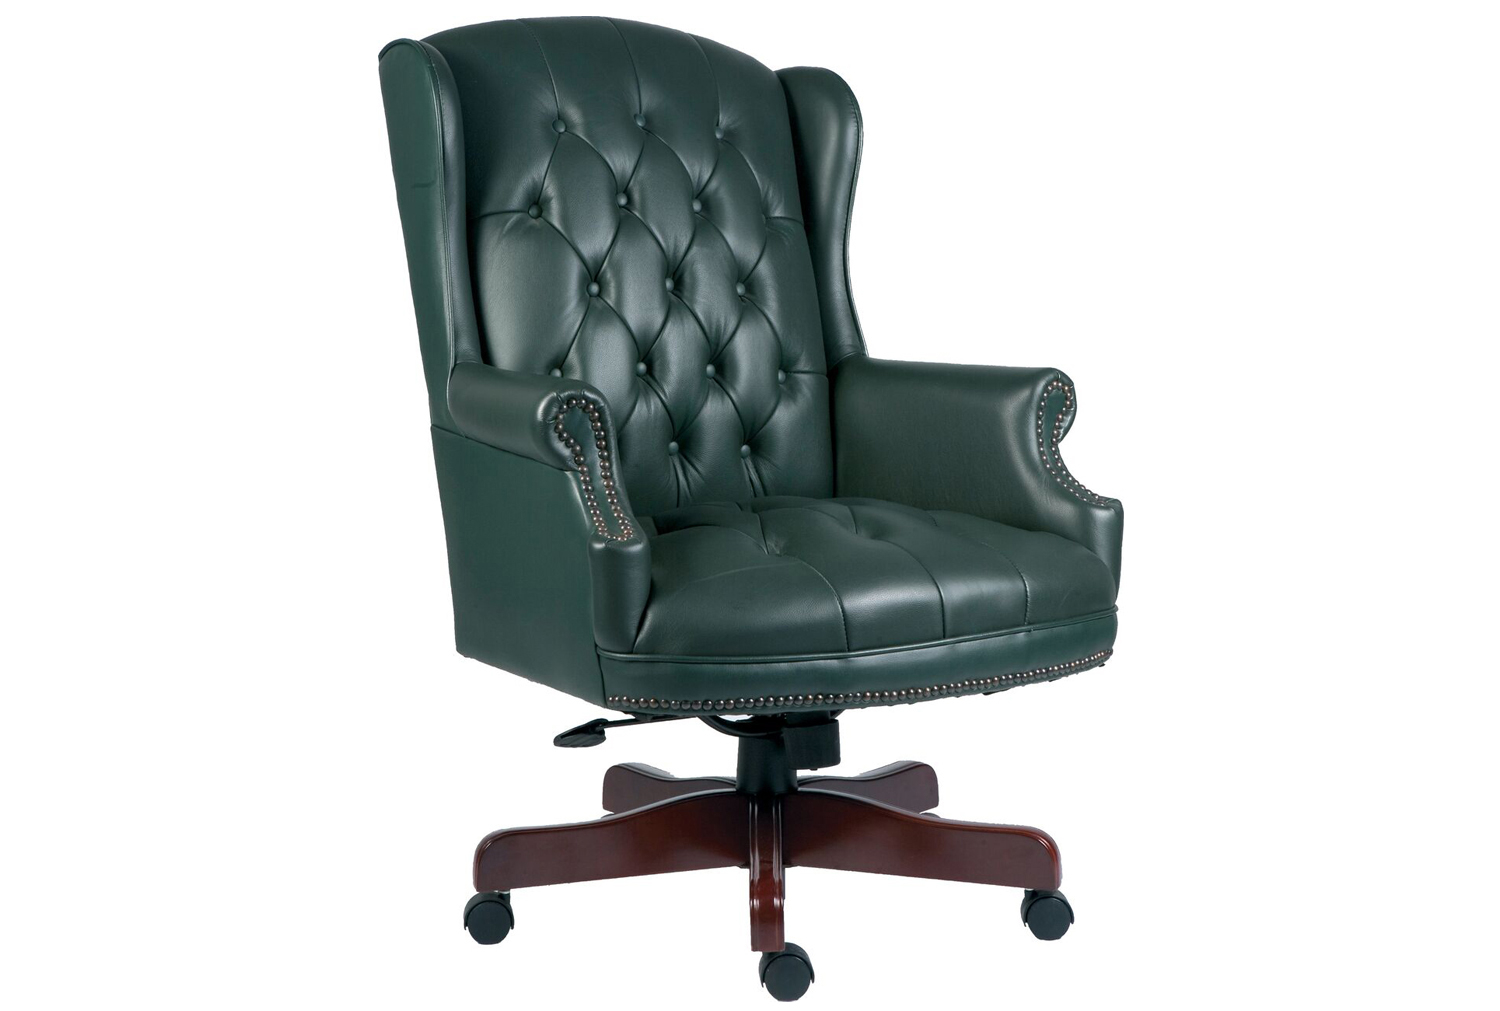 Chairman Swivel Office Chair Green, Green, Fully Installed